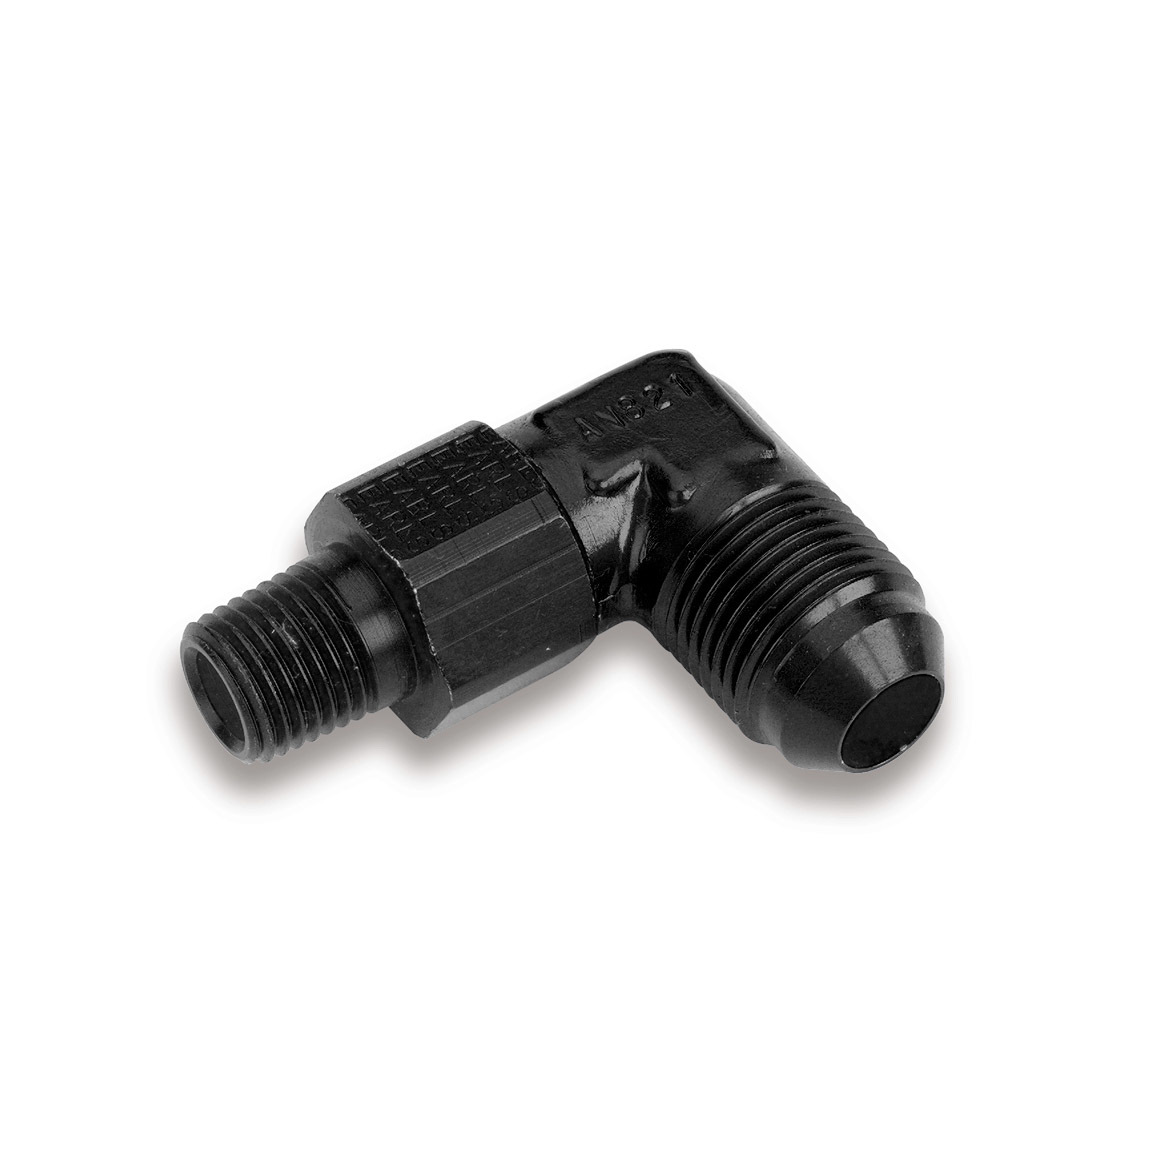 Earls AT922106ERL Fitting, Adapter, 90 Degree, 6 AN Male to 1/4 in NPT Male Swivel, Aluminum, Black Anodized, Each